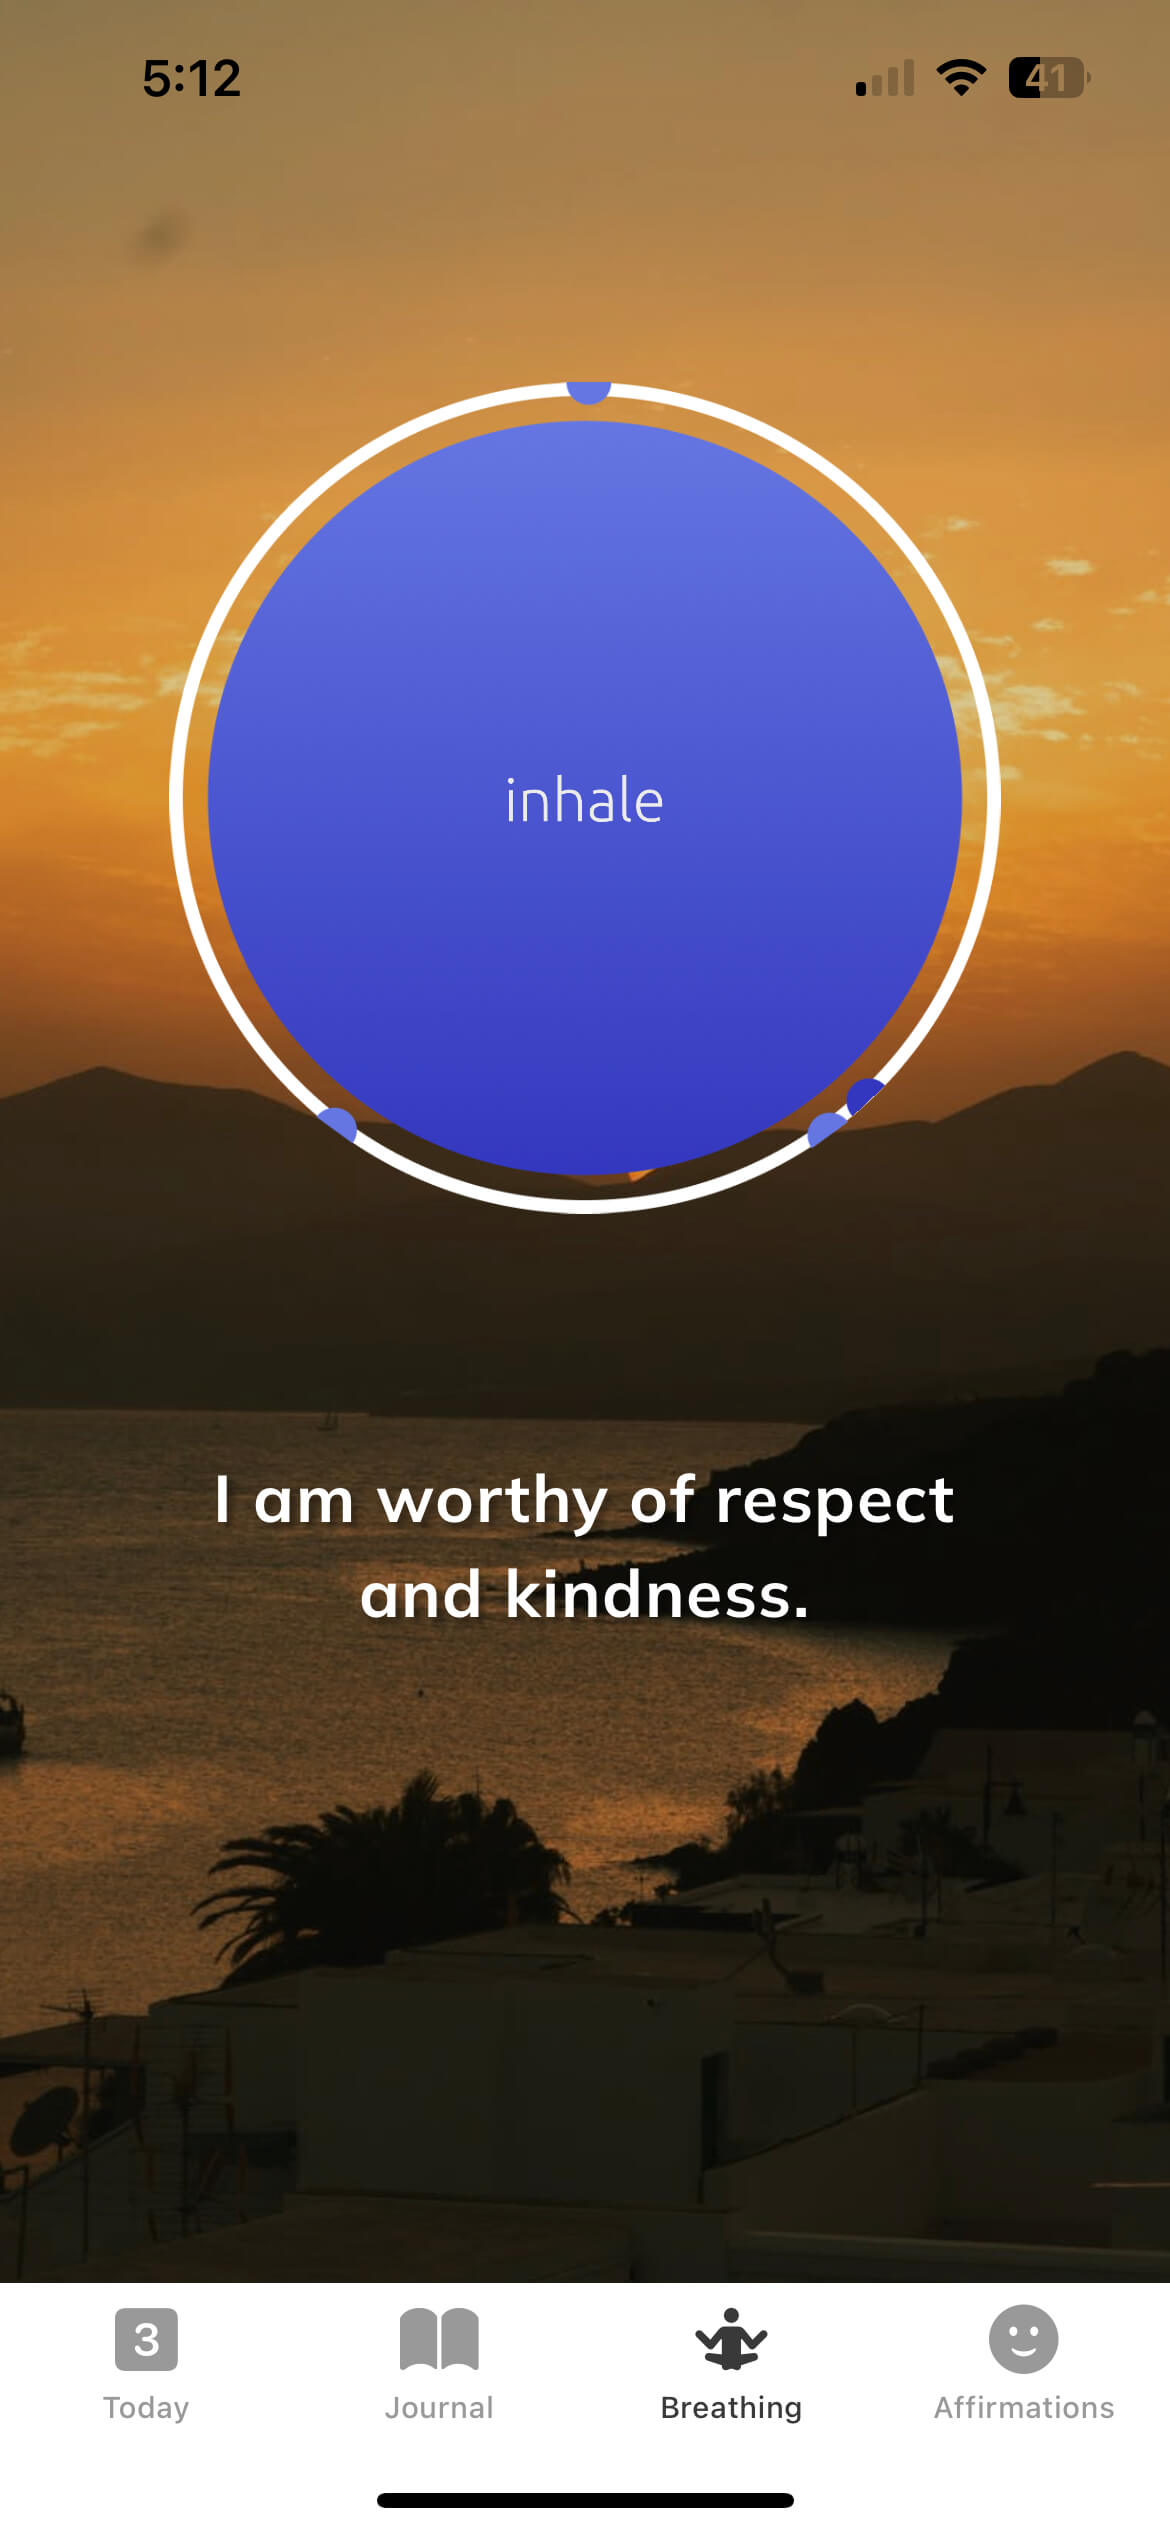 My well-being app with breathing exercise to calm yourself and live an intentional life.